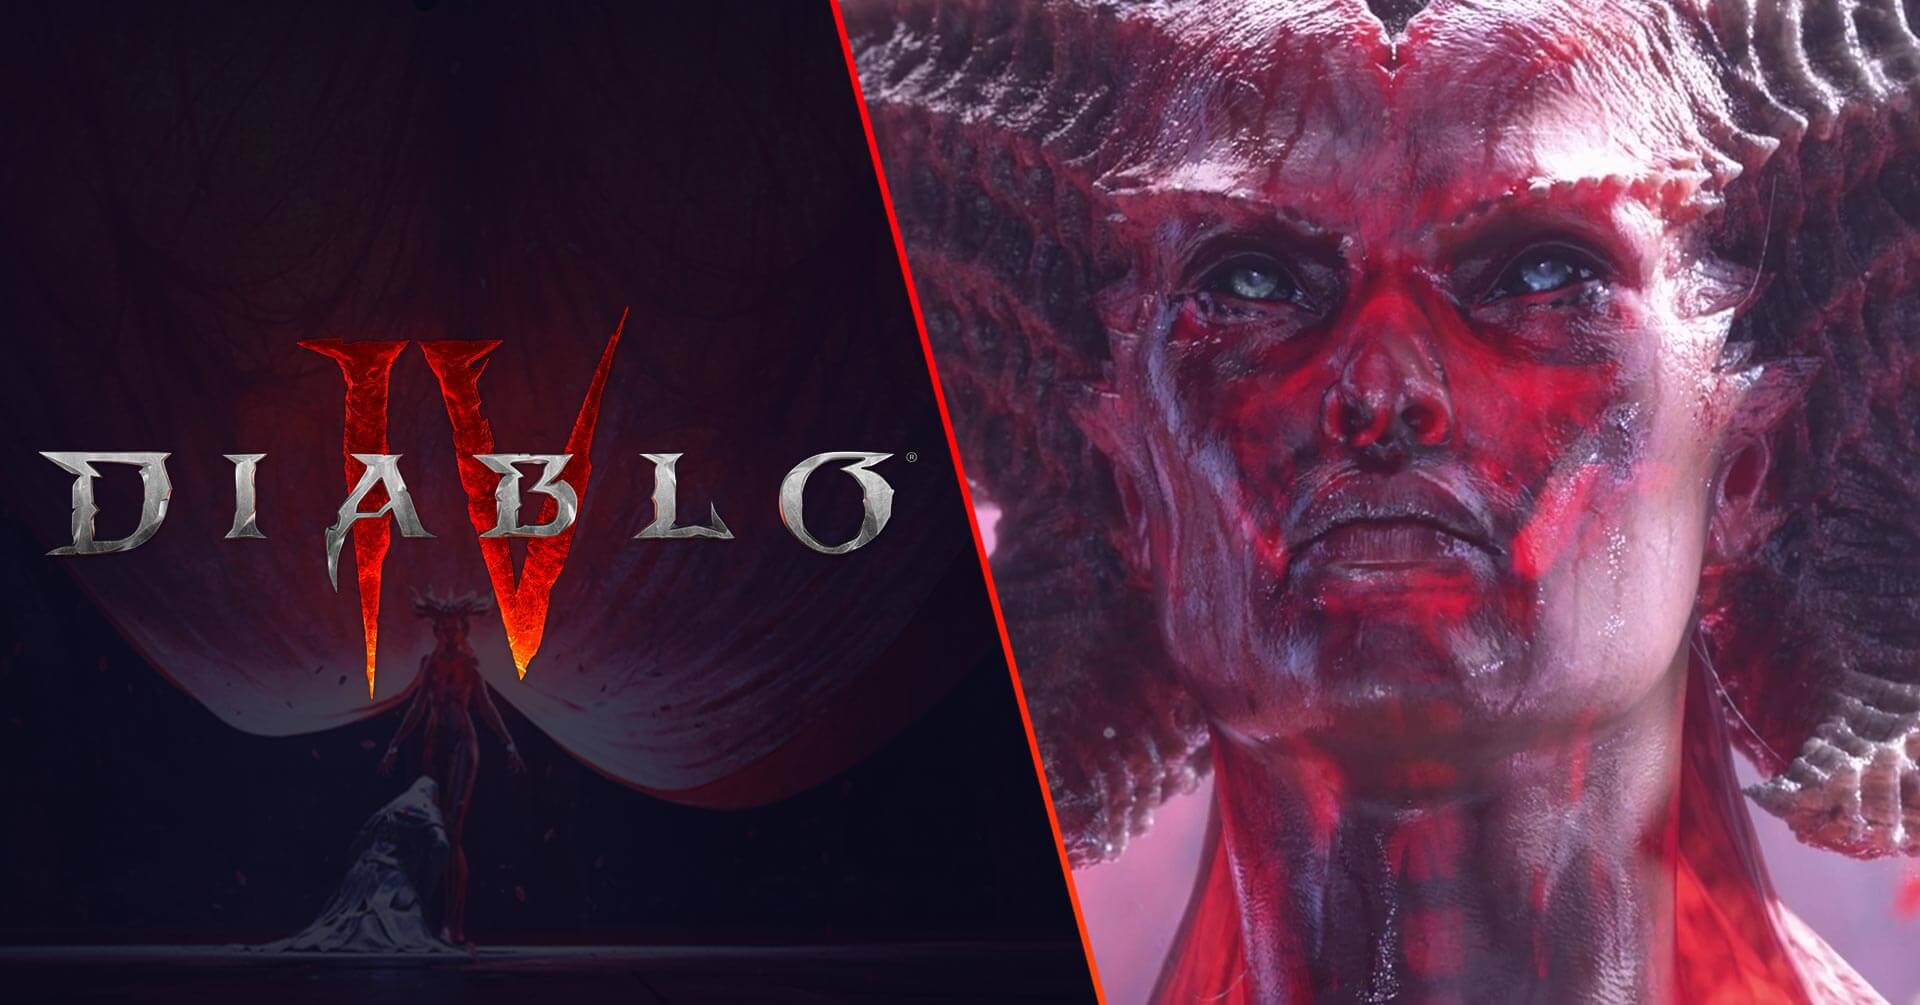 who was the voice in diablo iv trailer